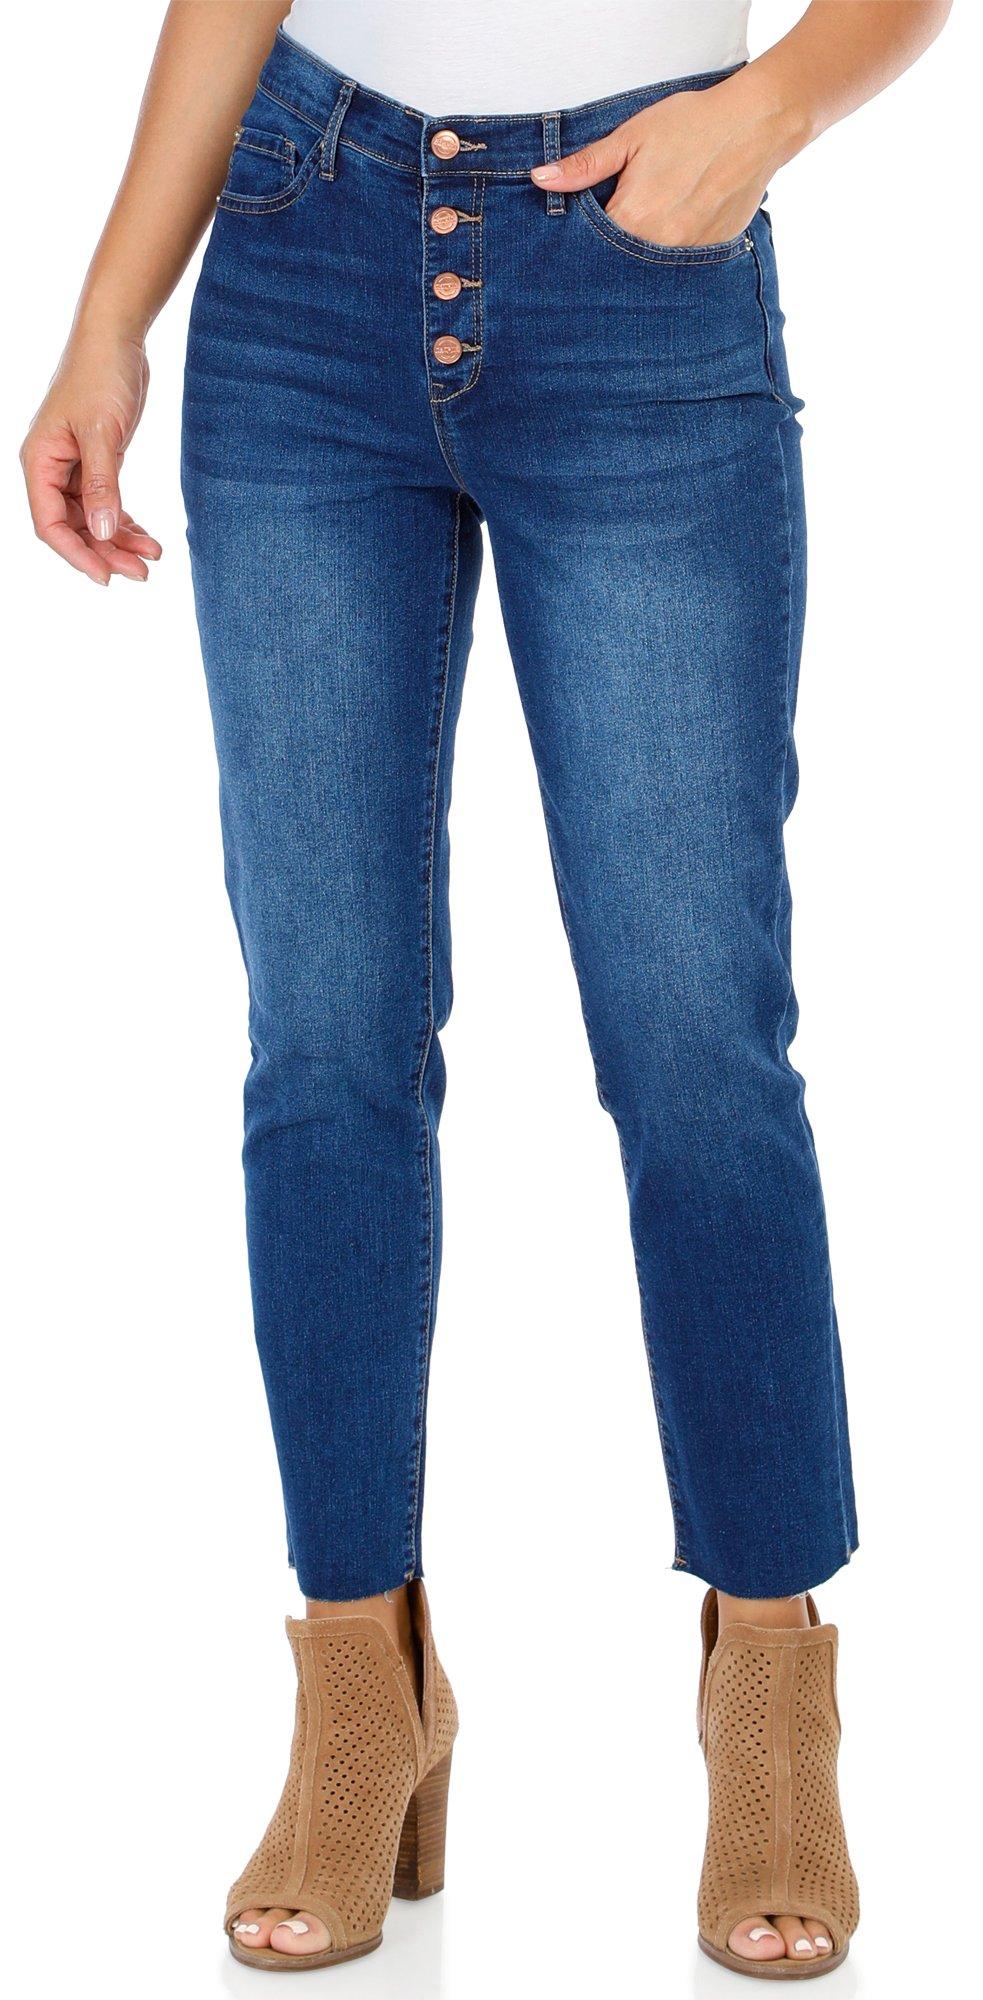 Women's Solid Button Fly Skinny Jeans